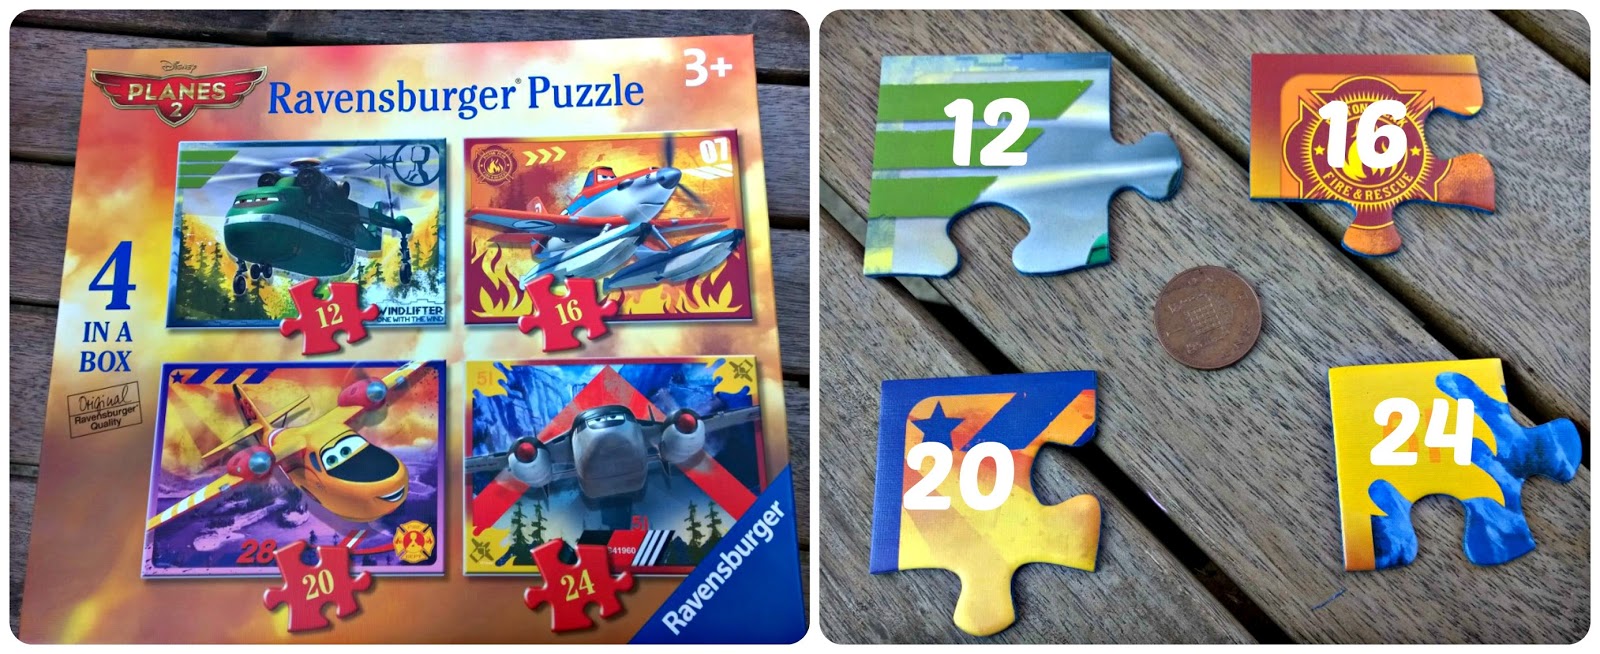 Disney Planes 2: Fire and Rescue 4 in a box Jigsaw Puzzle from Ravensburger